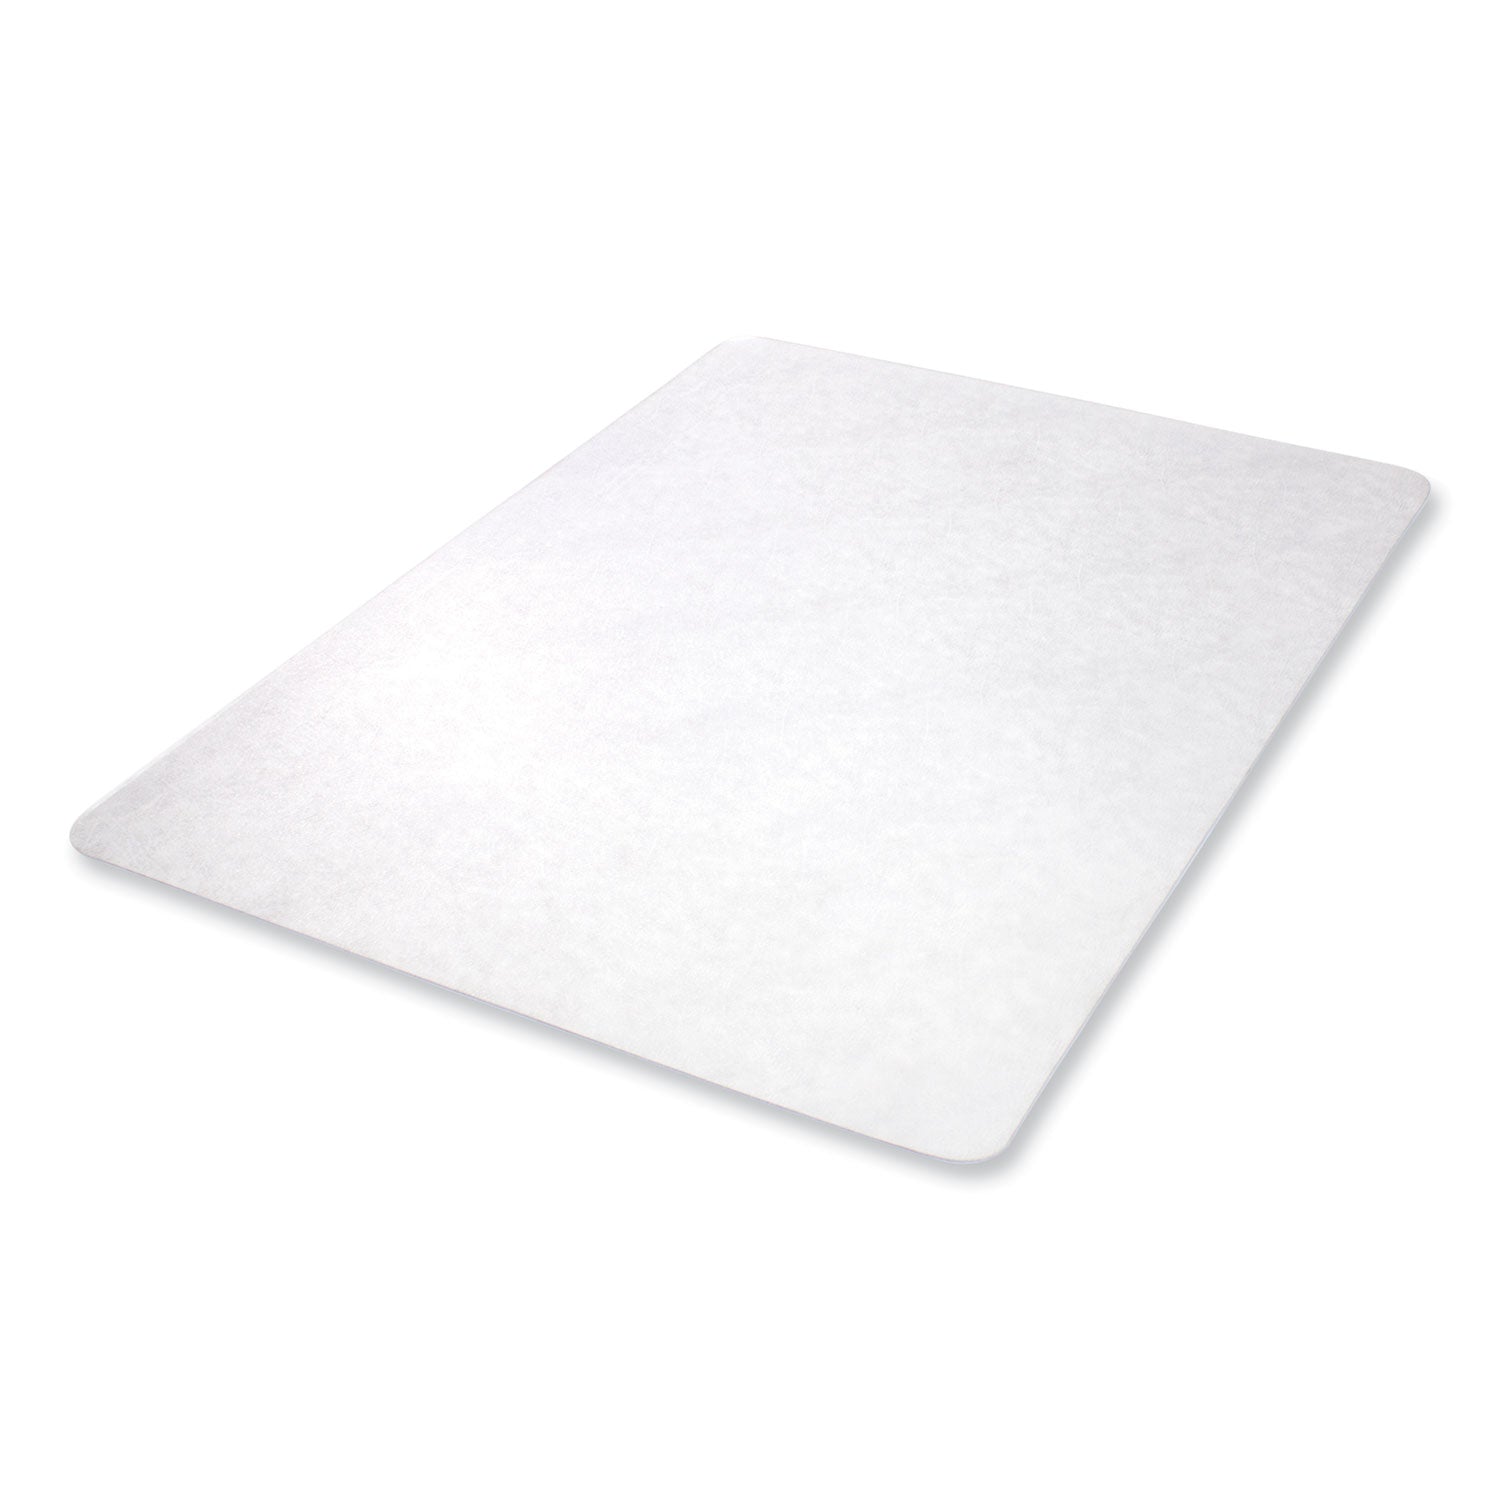 economat-all-day-use-chair-mat-for-hard-floors-flat-packed-45-x-53-clear_defcm2e242 - 6